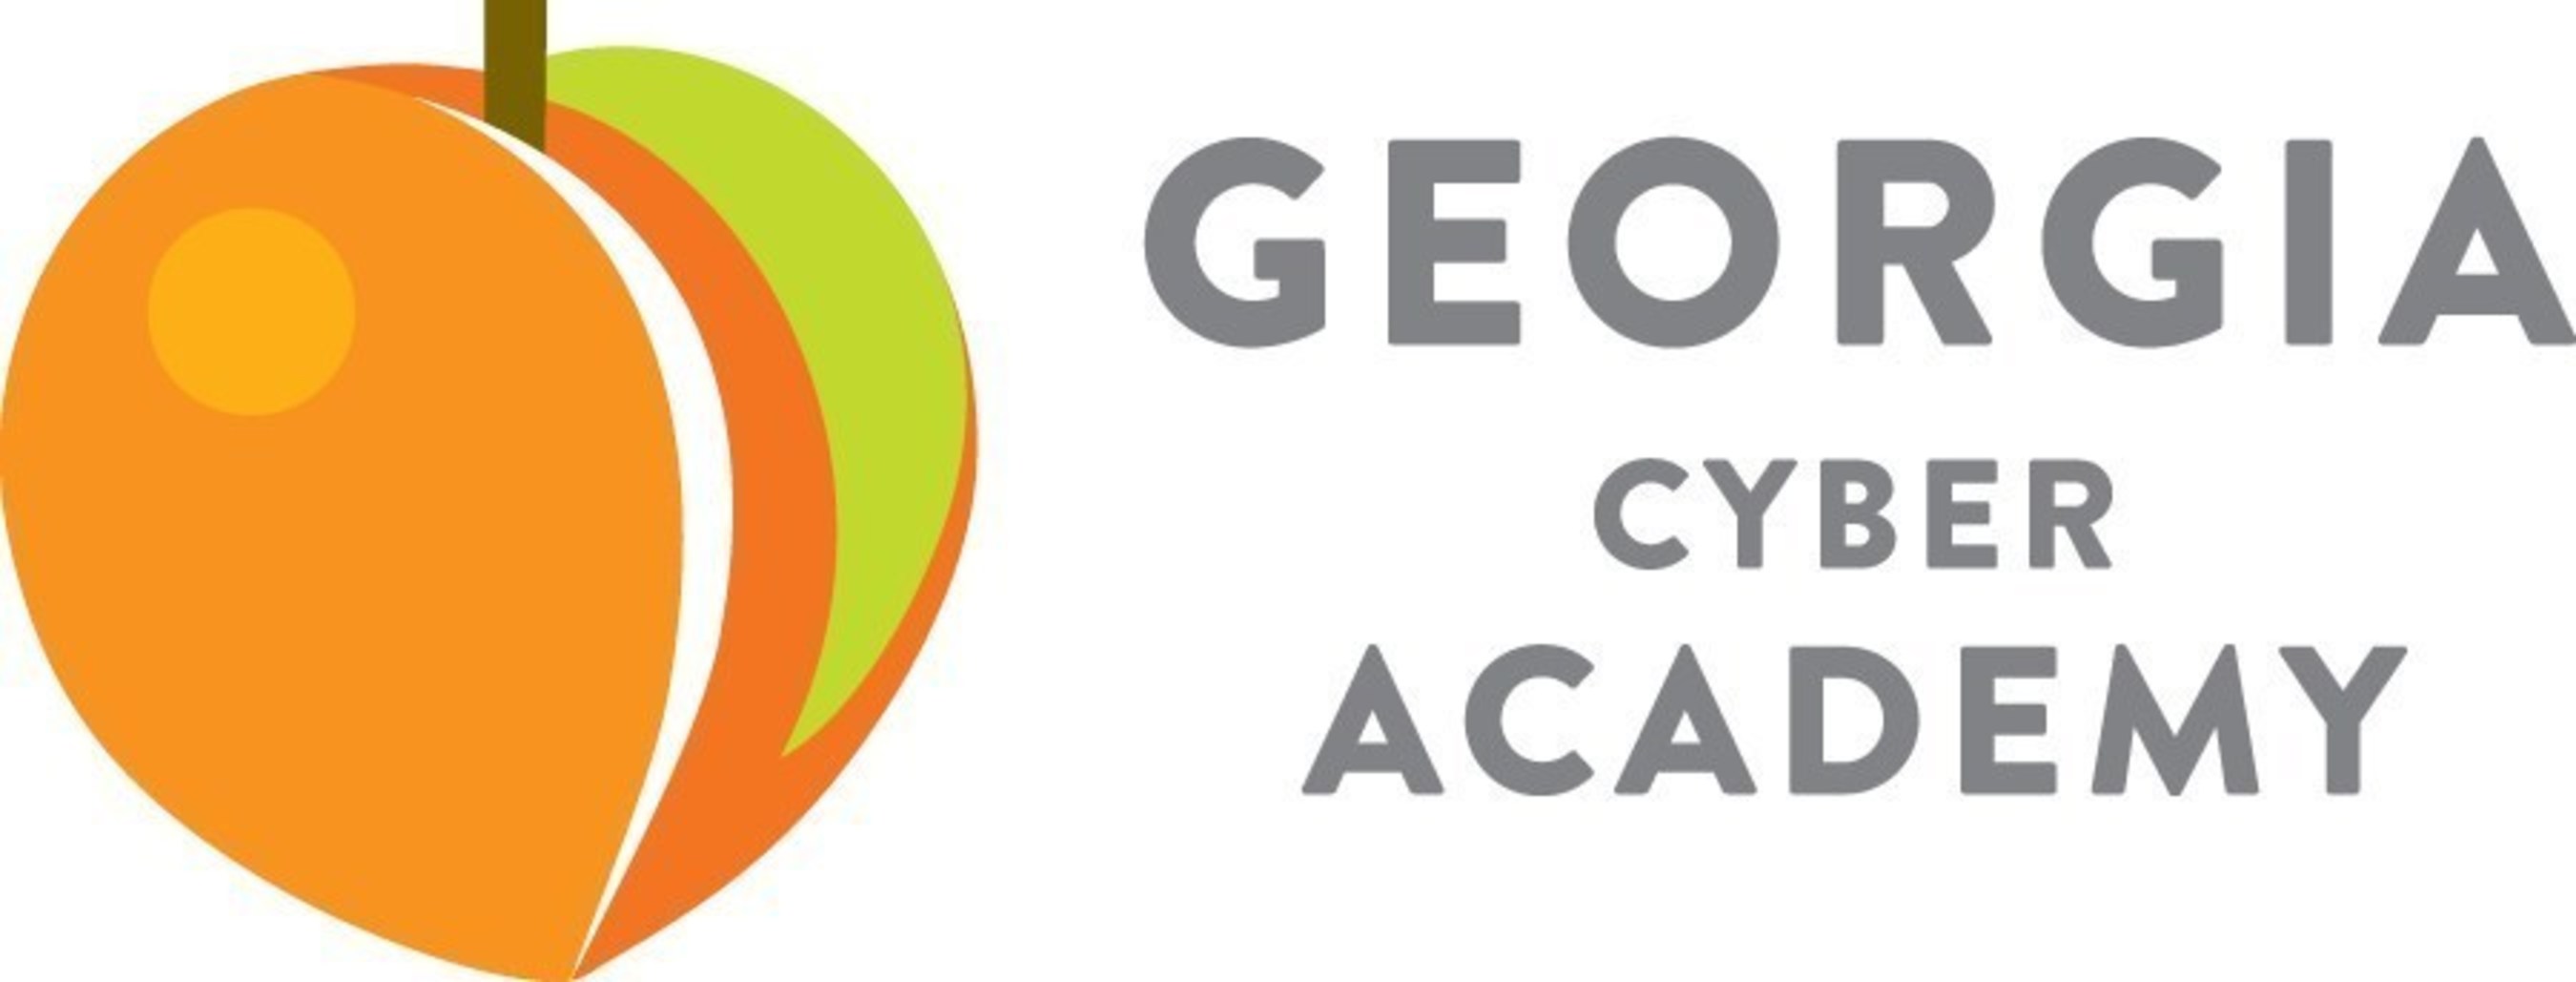 Georgia Cyber Academy Graduating Class To Be Honored At Ceremony On May 21st